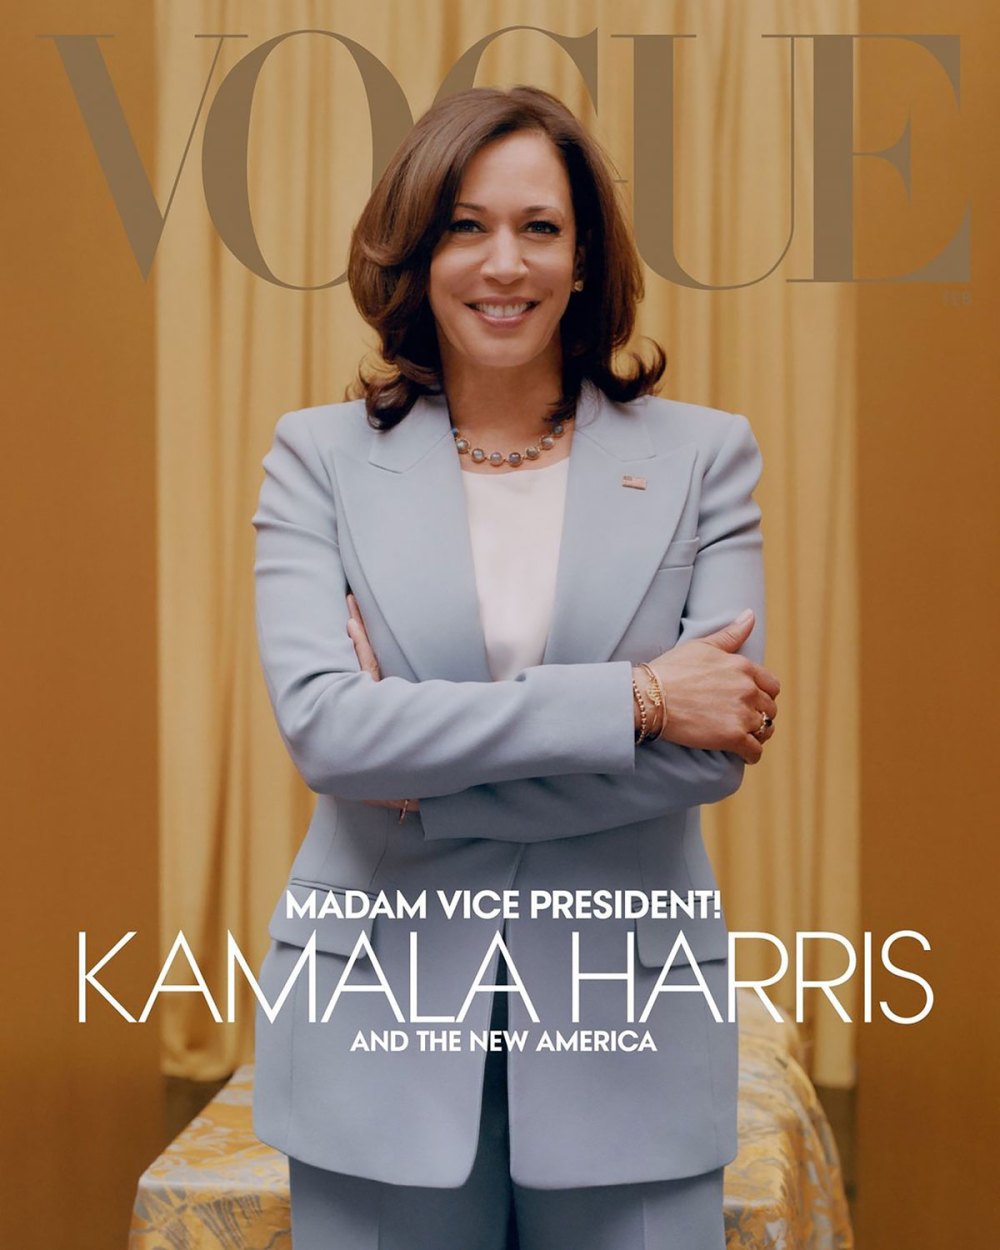 Why People Are Upset With Kamala Harris' American 'Vogue' Cover